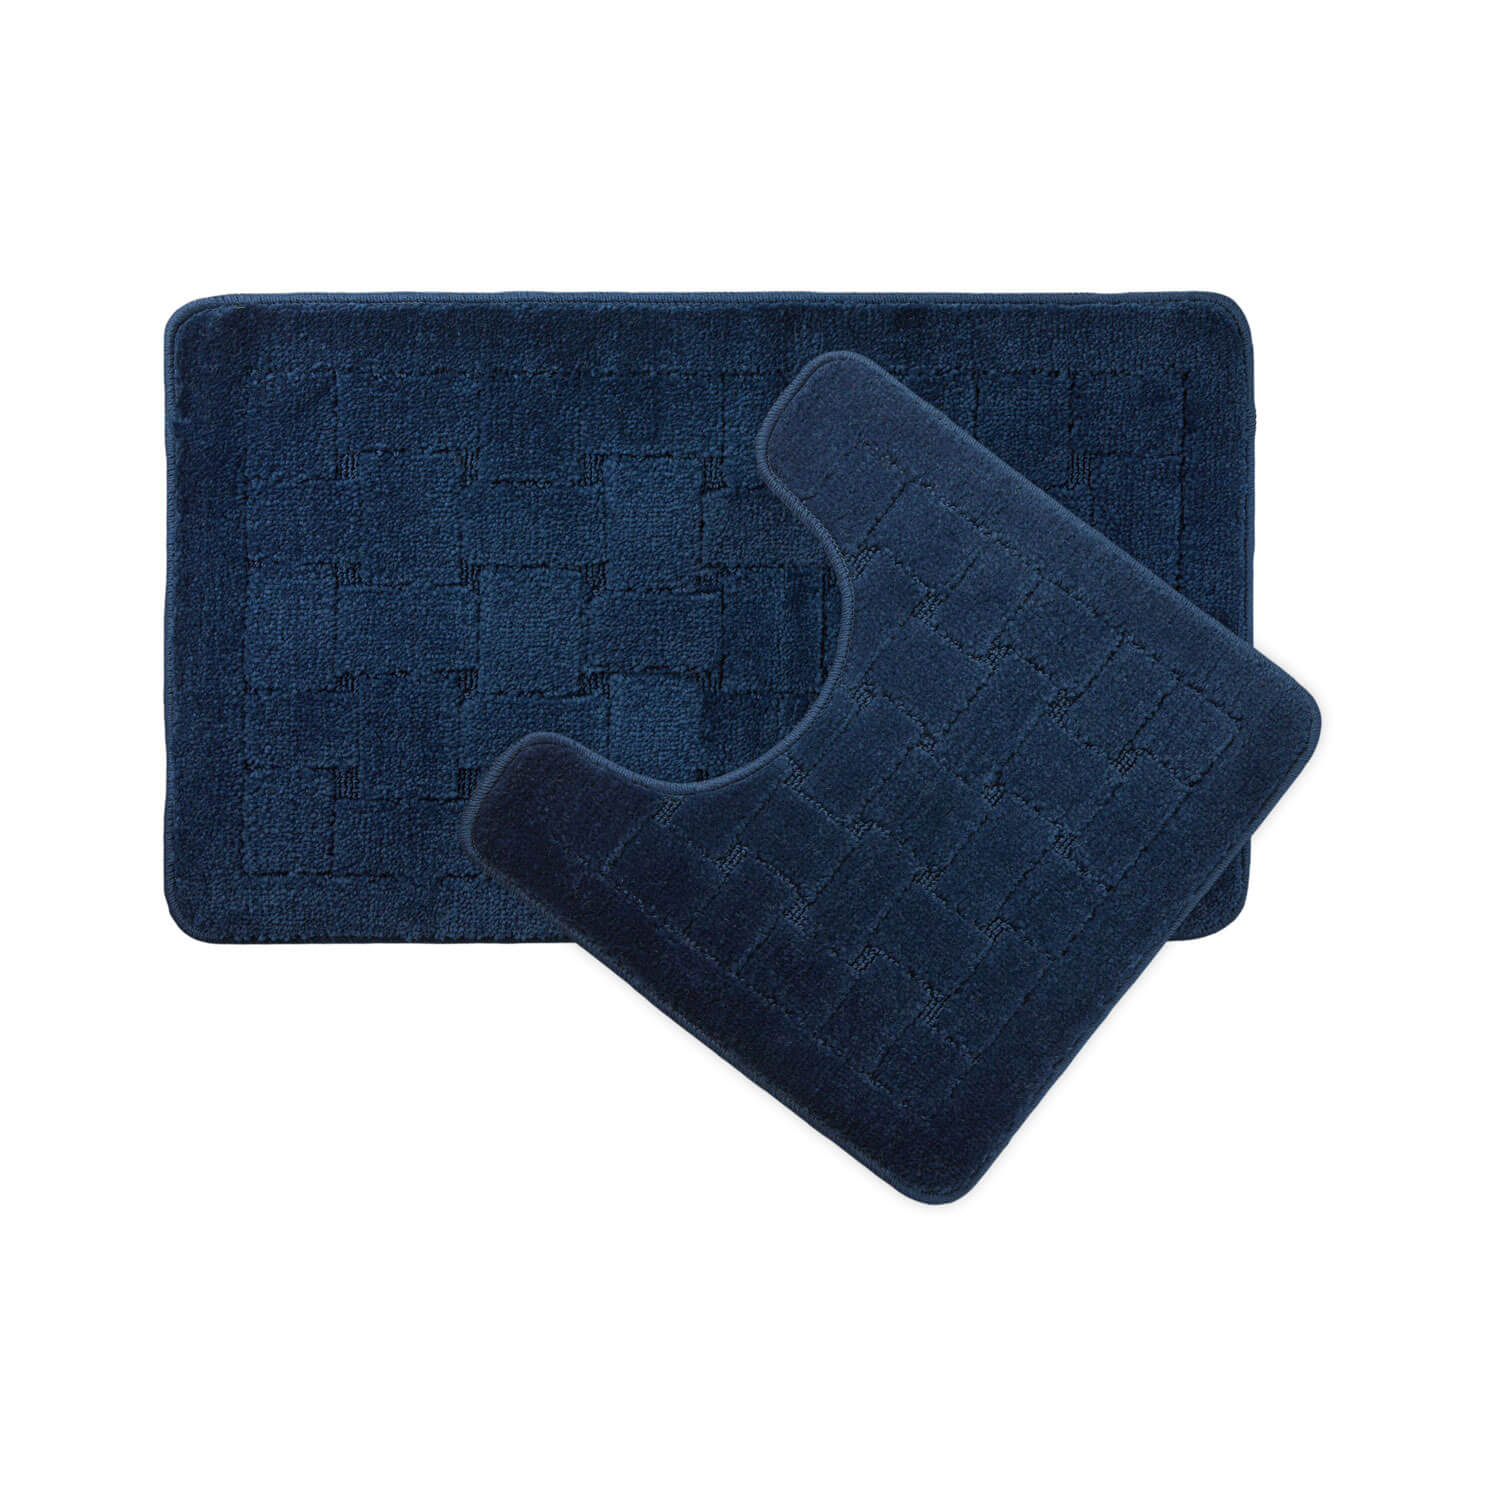 The Home Bathroom Orkney Bath Mat Set - Navy 1 Shaws Department Stores